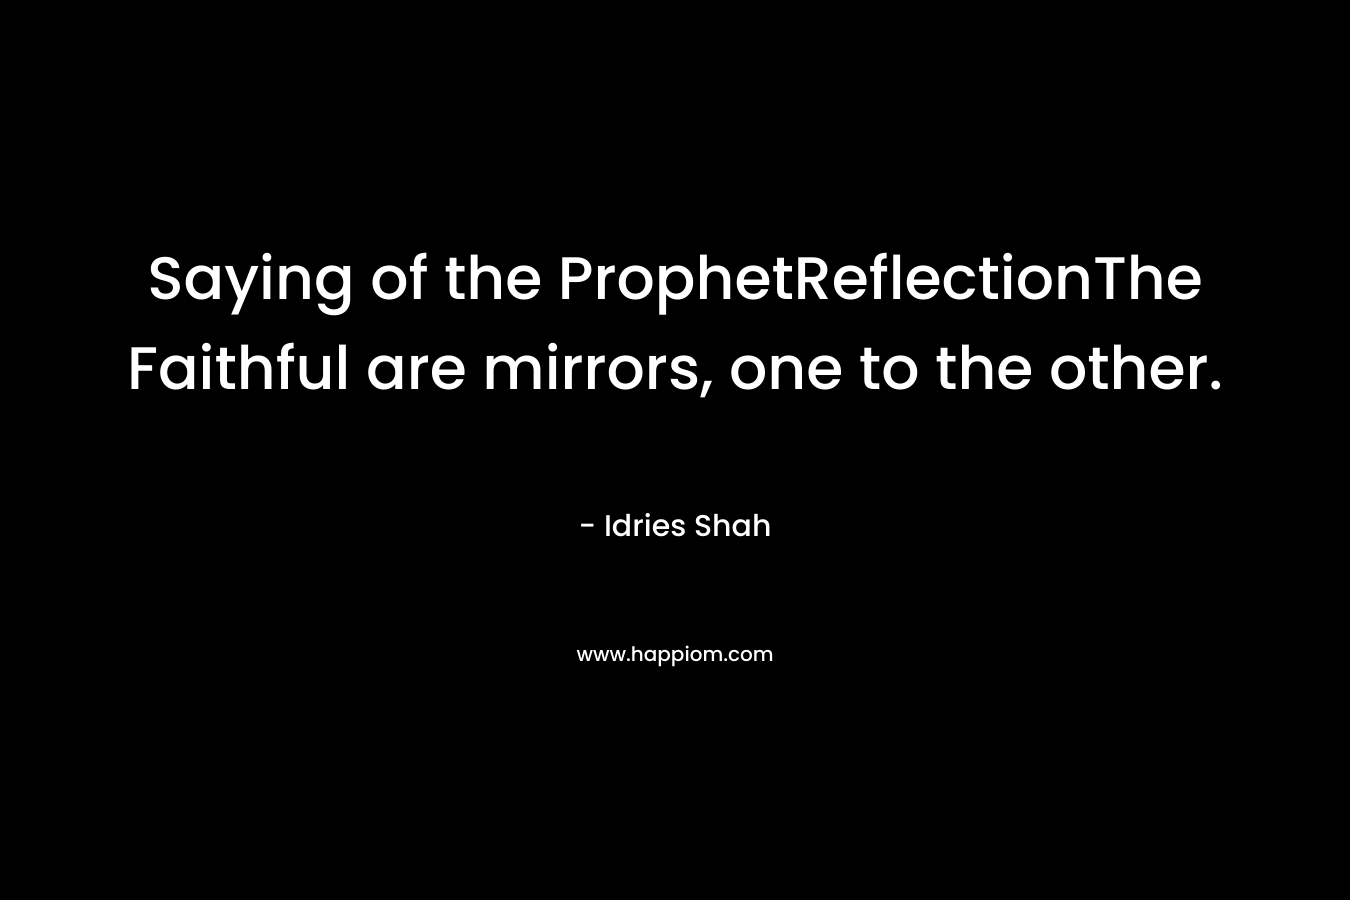 Saying of the ProphetReflectionThe Faithful are mirrors, one to the other. – Idries Shah